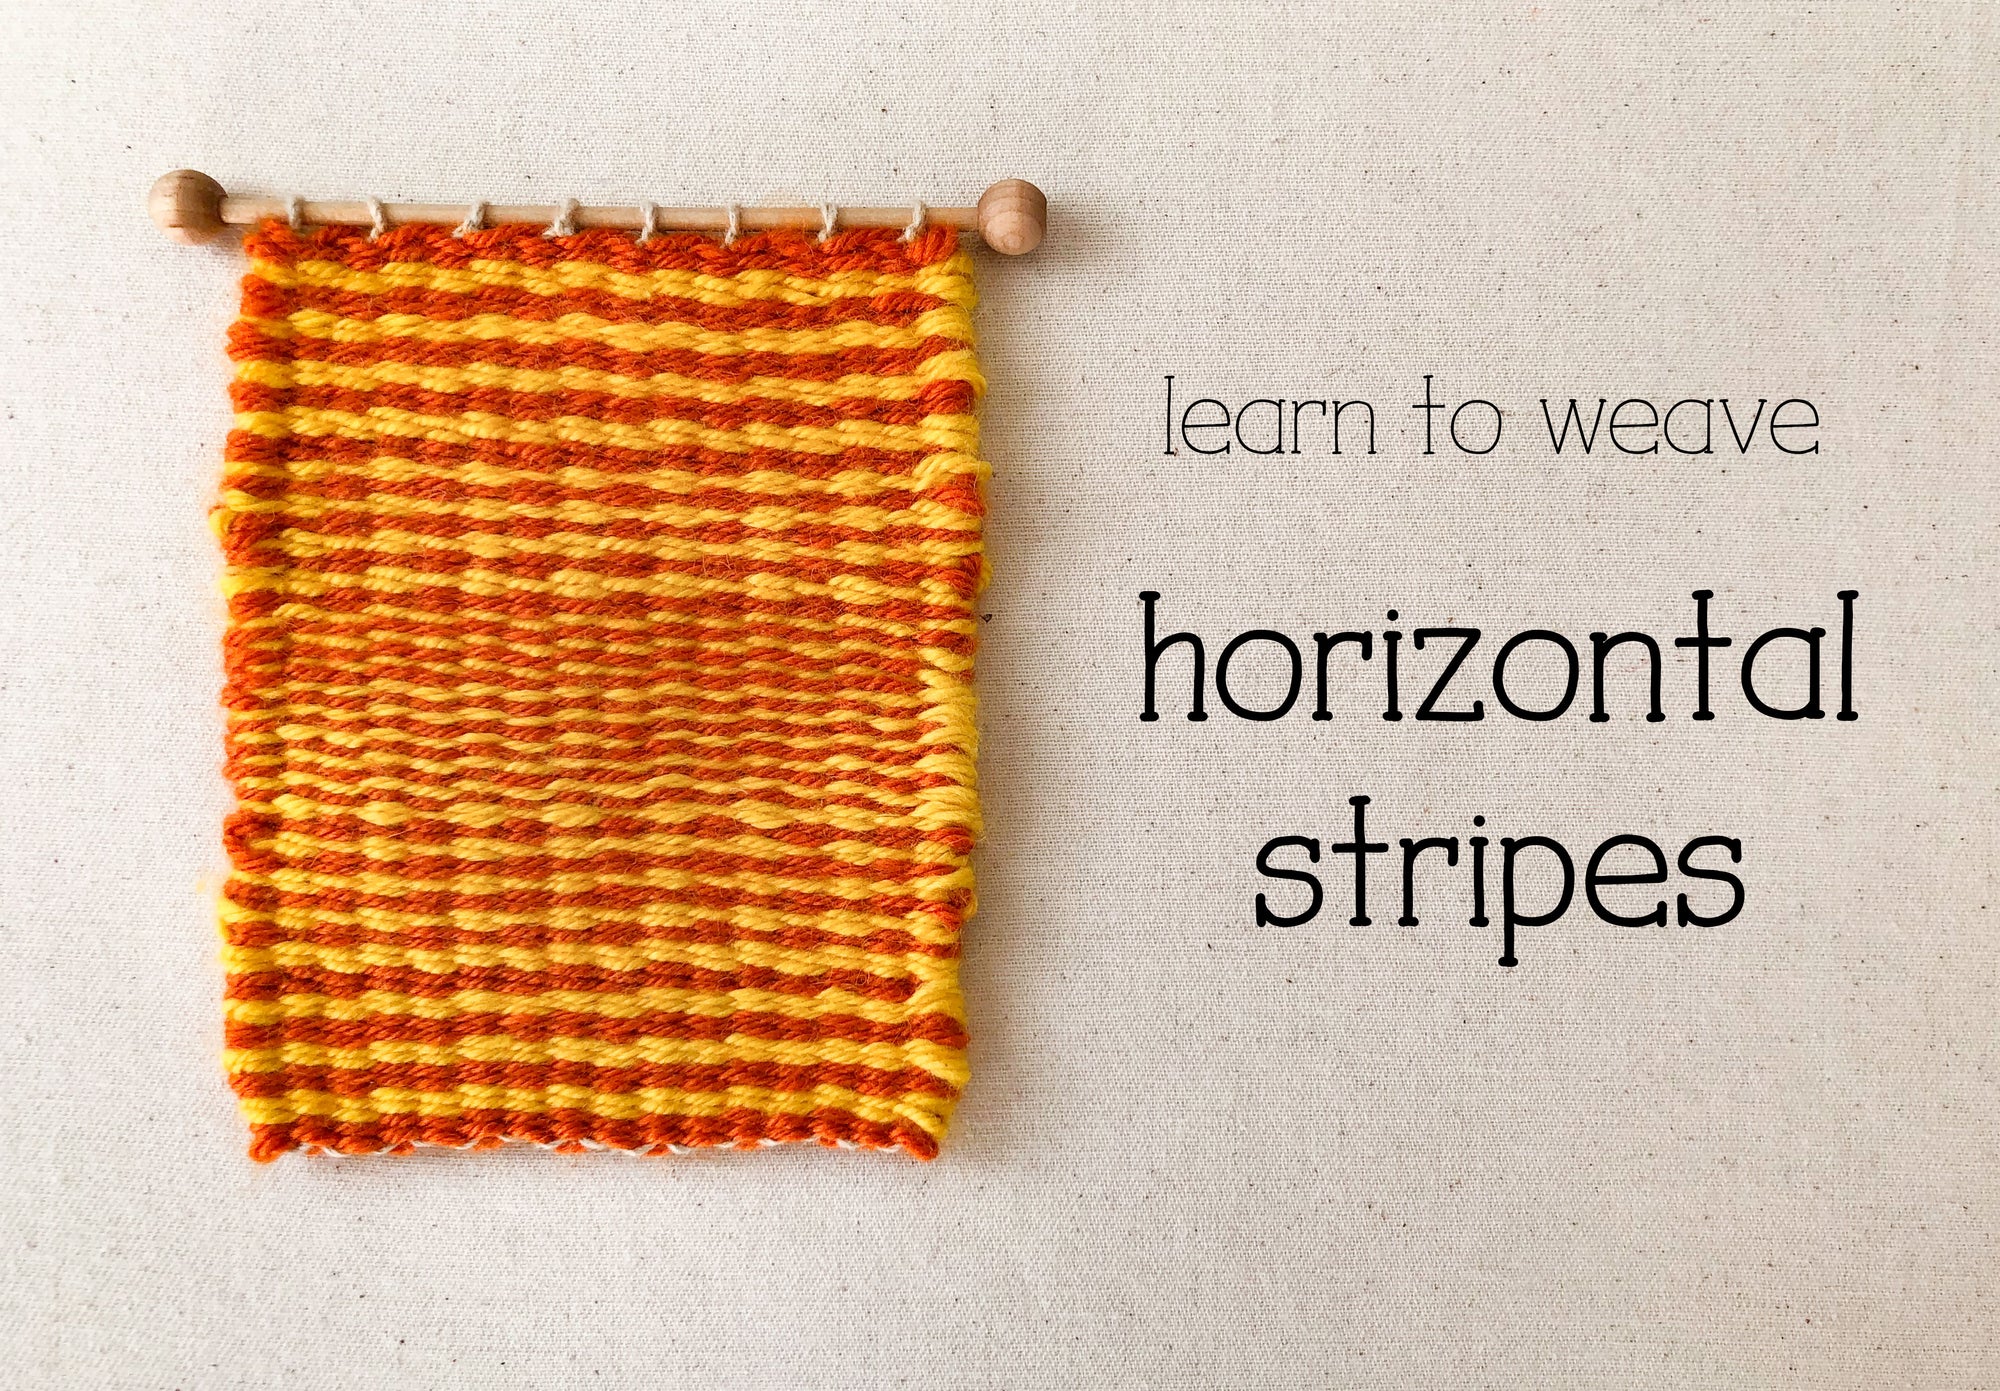 little weaving with horizontal tripes